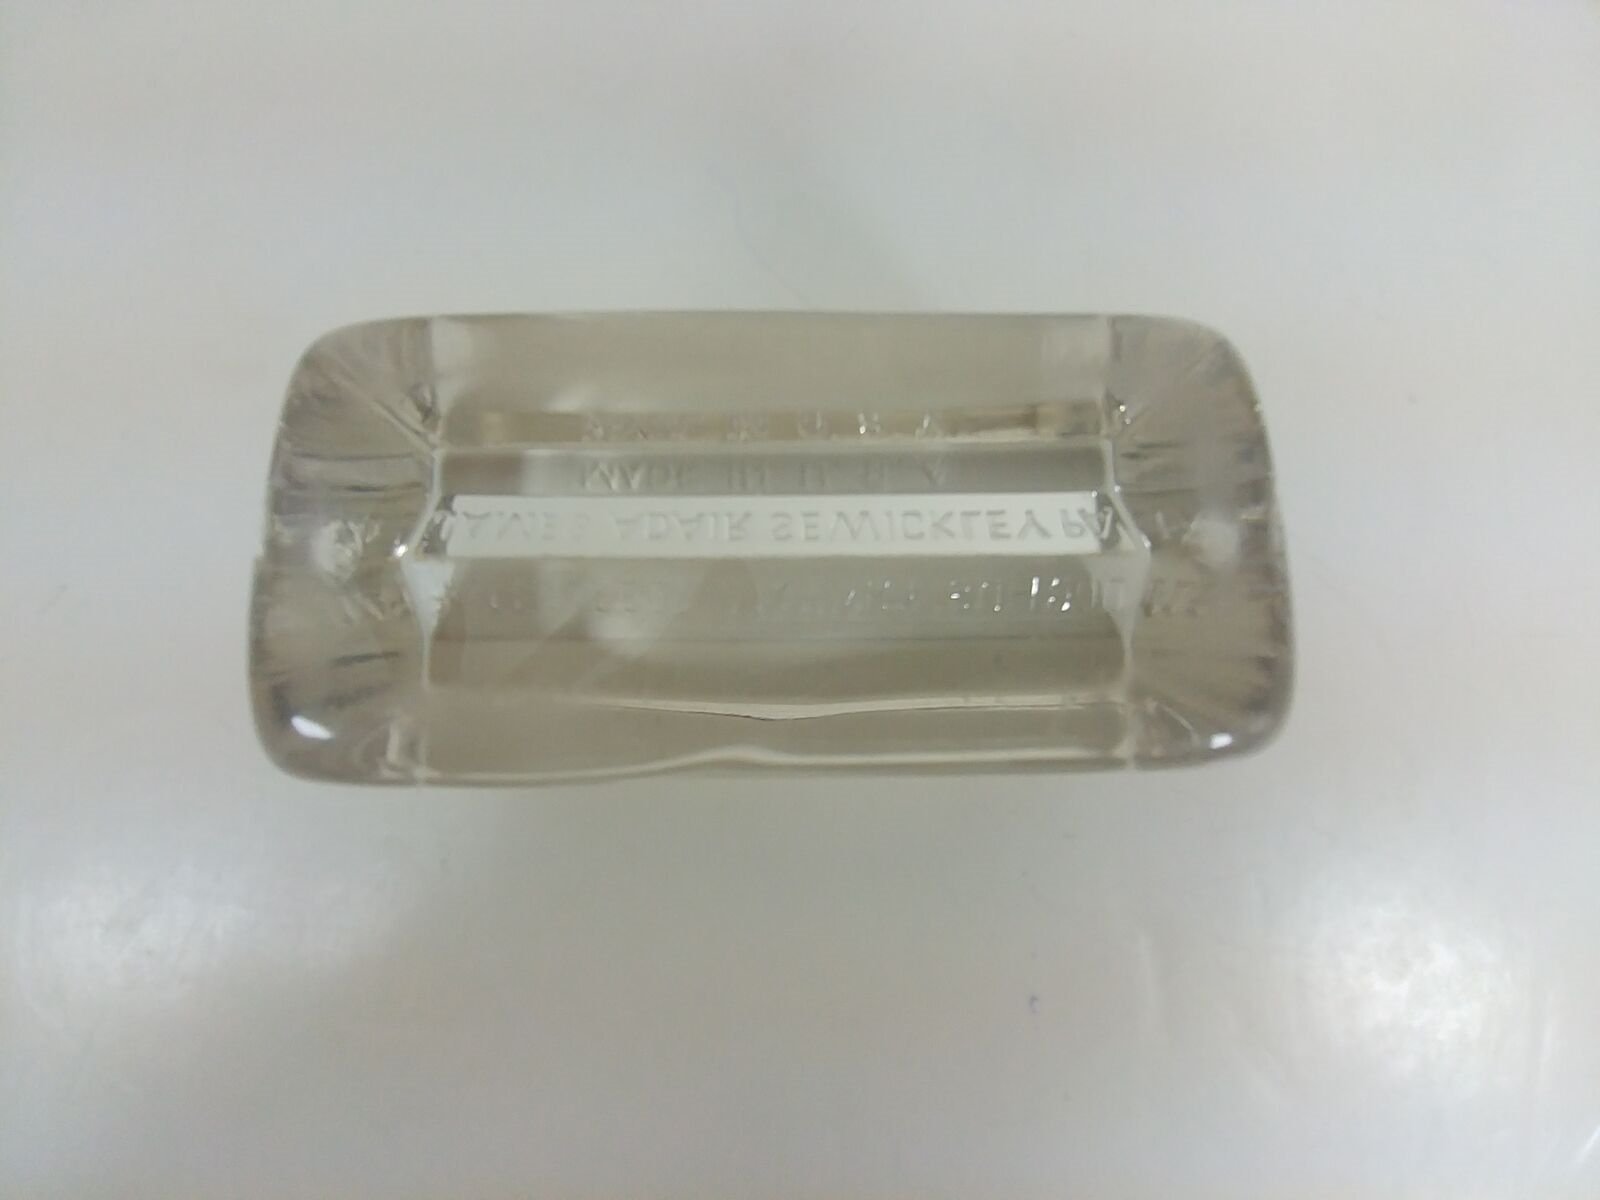 Vintage Glass Paperweight Embossed with James Adair Sewickley PA 1900